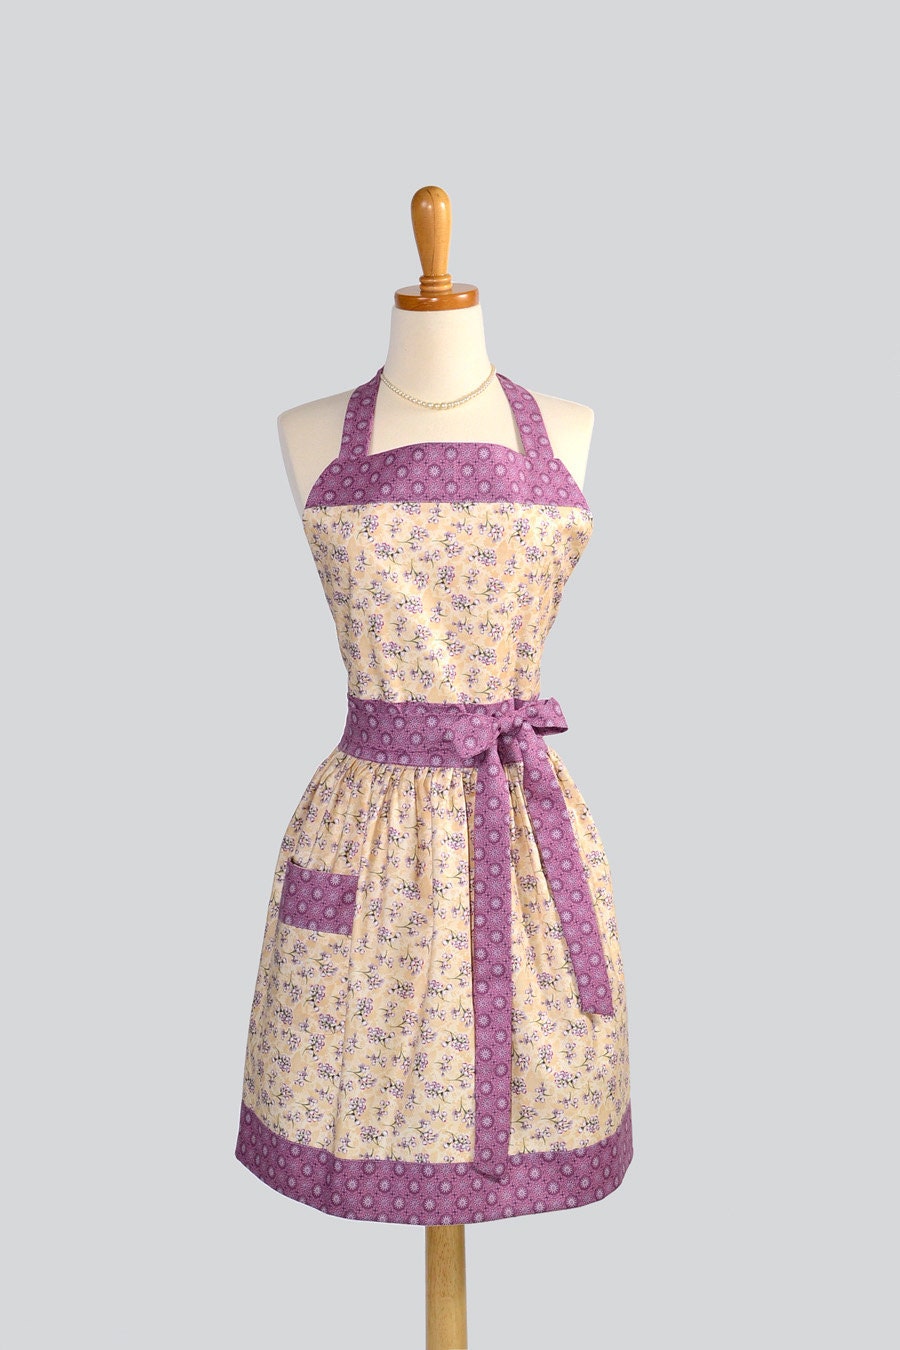 Womens Bib Full Apron : Full Kitchen Apron in Vintage Indigo Lavender Flowers with Creamy Background Perfect for Monogram or Persoalization